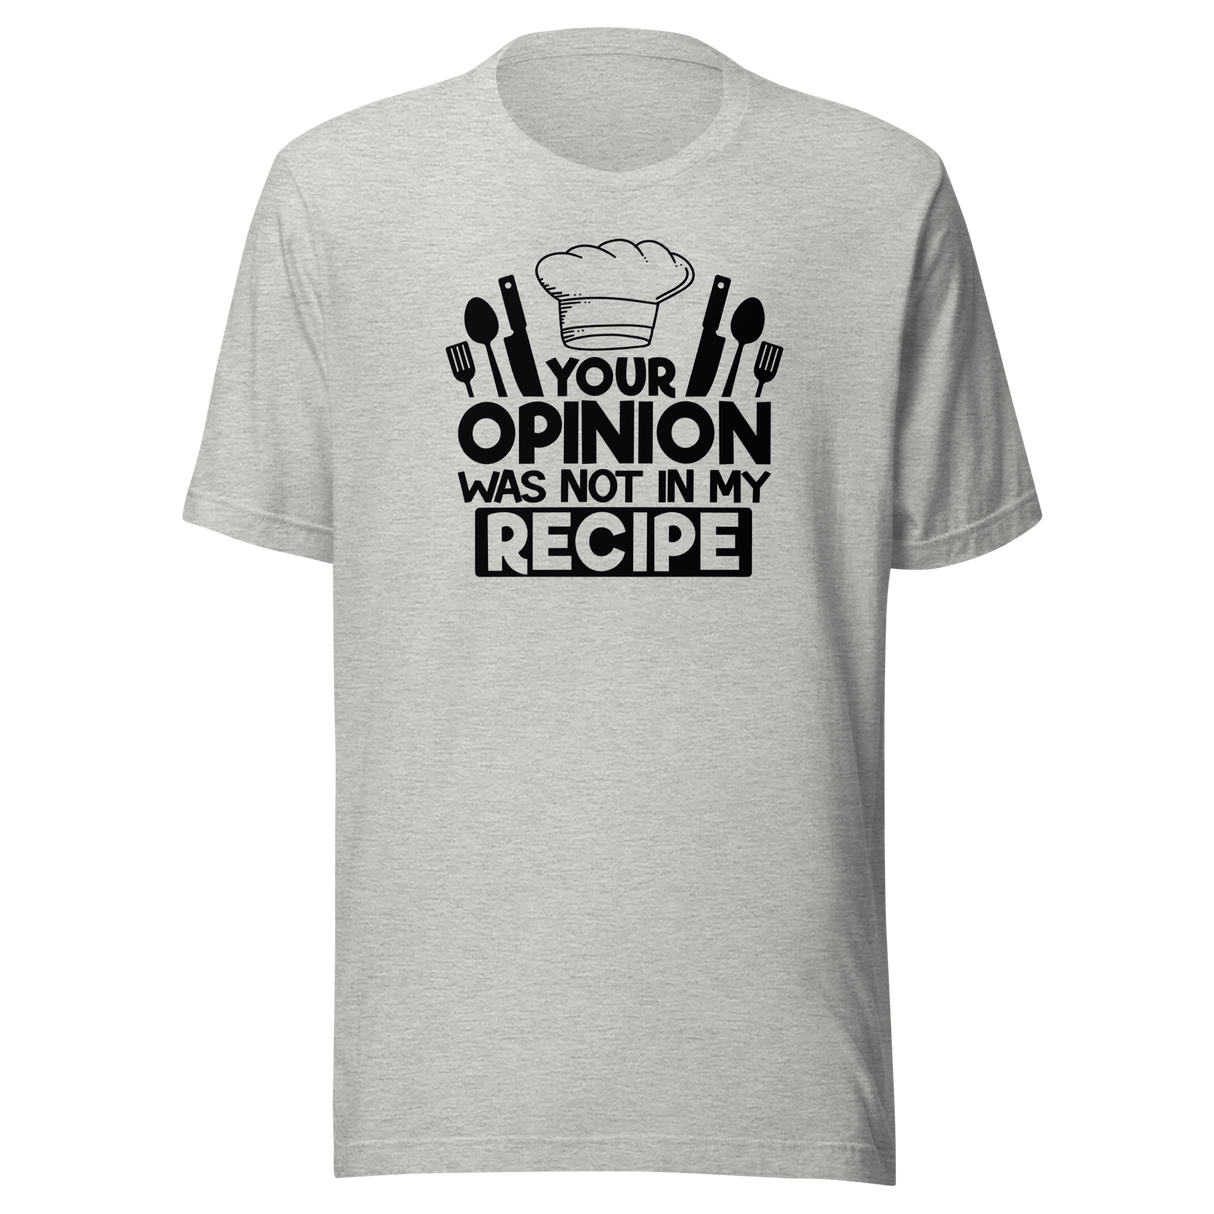 Your Opinion Was Not In My Recipe - Food Tee - Funny T-Shirt - Delicious Tee - Appetizing T-Shirt - Tasty Tee